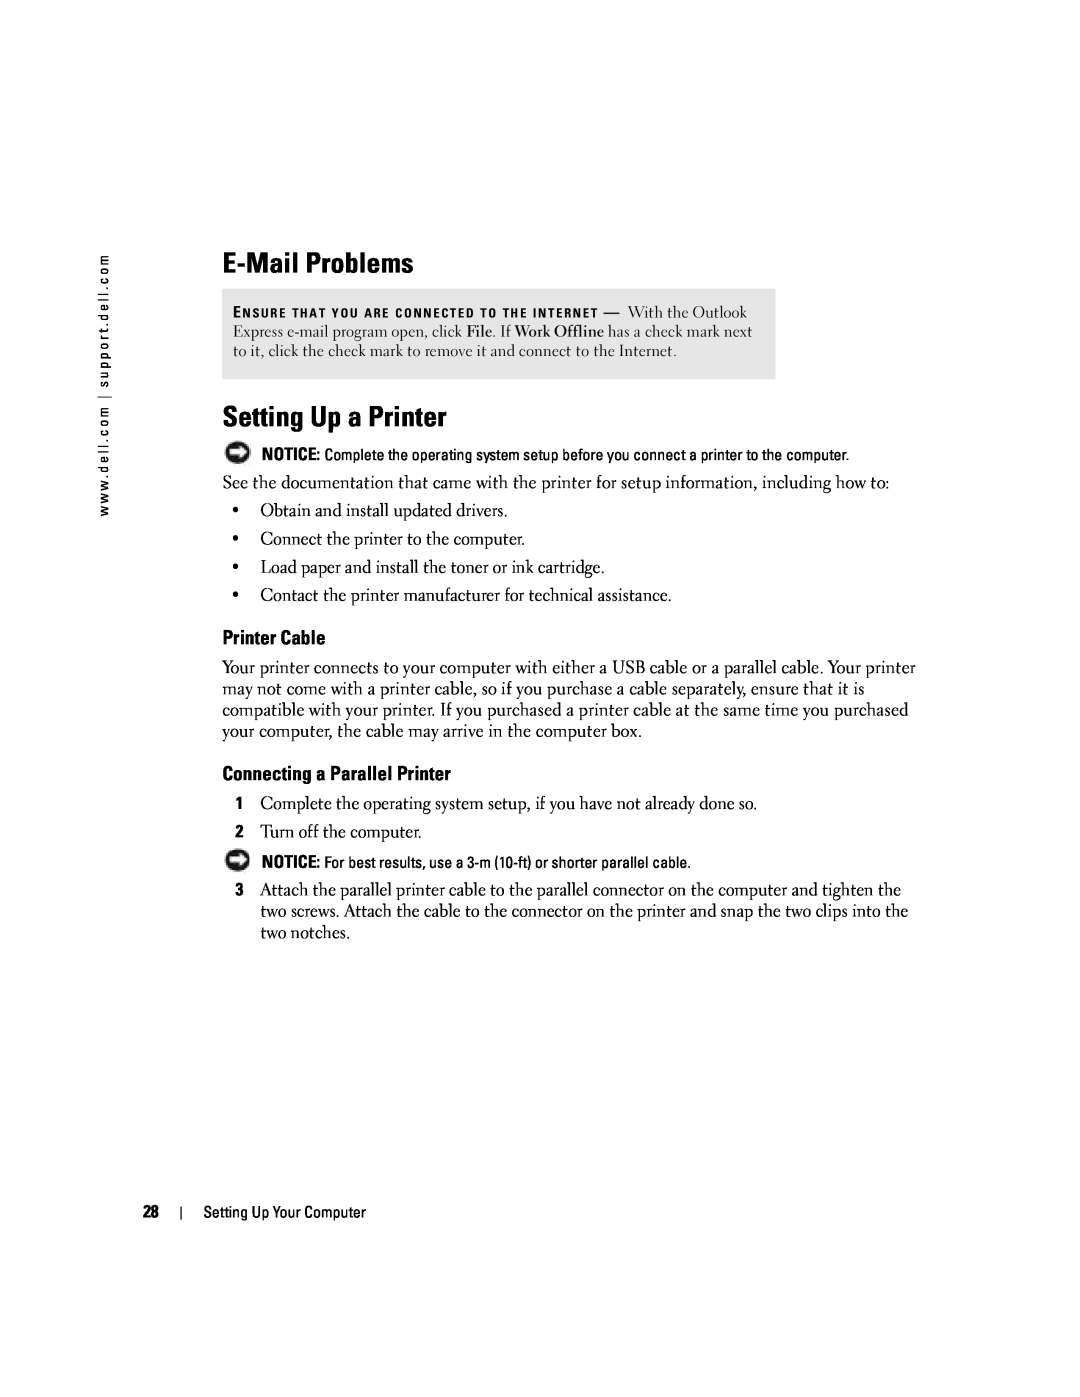 Dell PP10L owner manual E-Mail Problems, Setting Up a Printer, Printer Cable, Connecting a Parallel Printer 